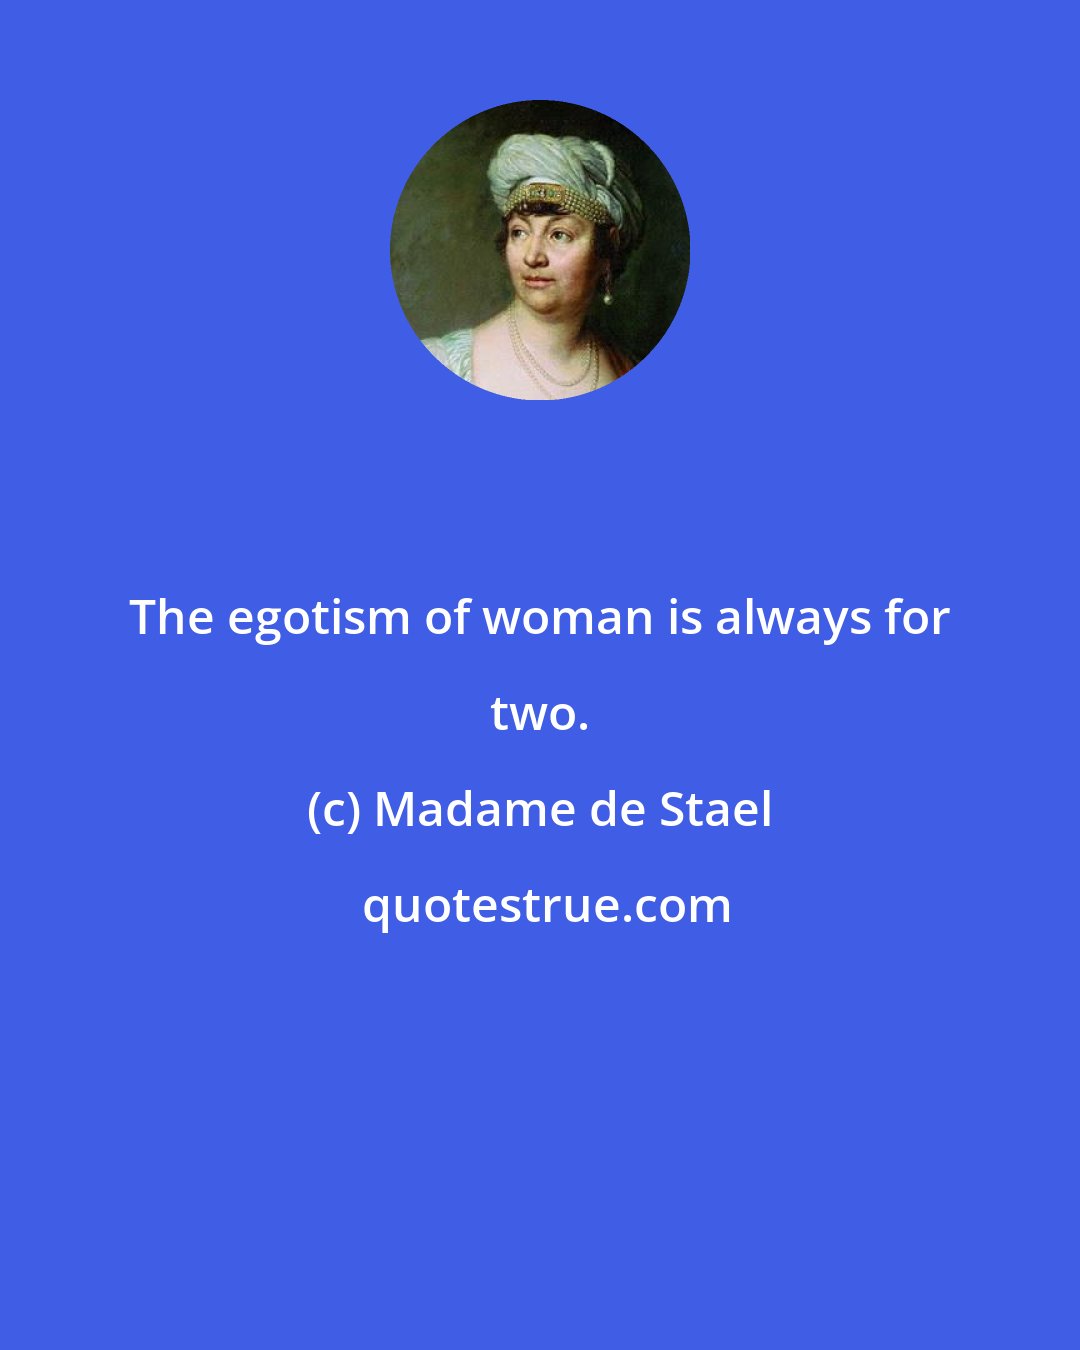 Madame de Stael: The egotism of woman is always for two.